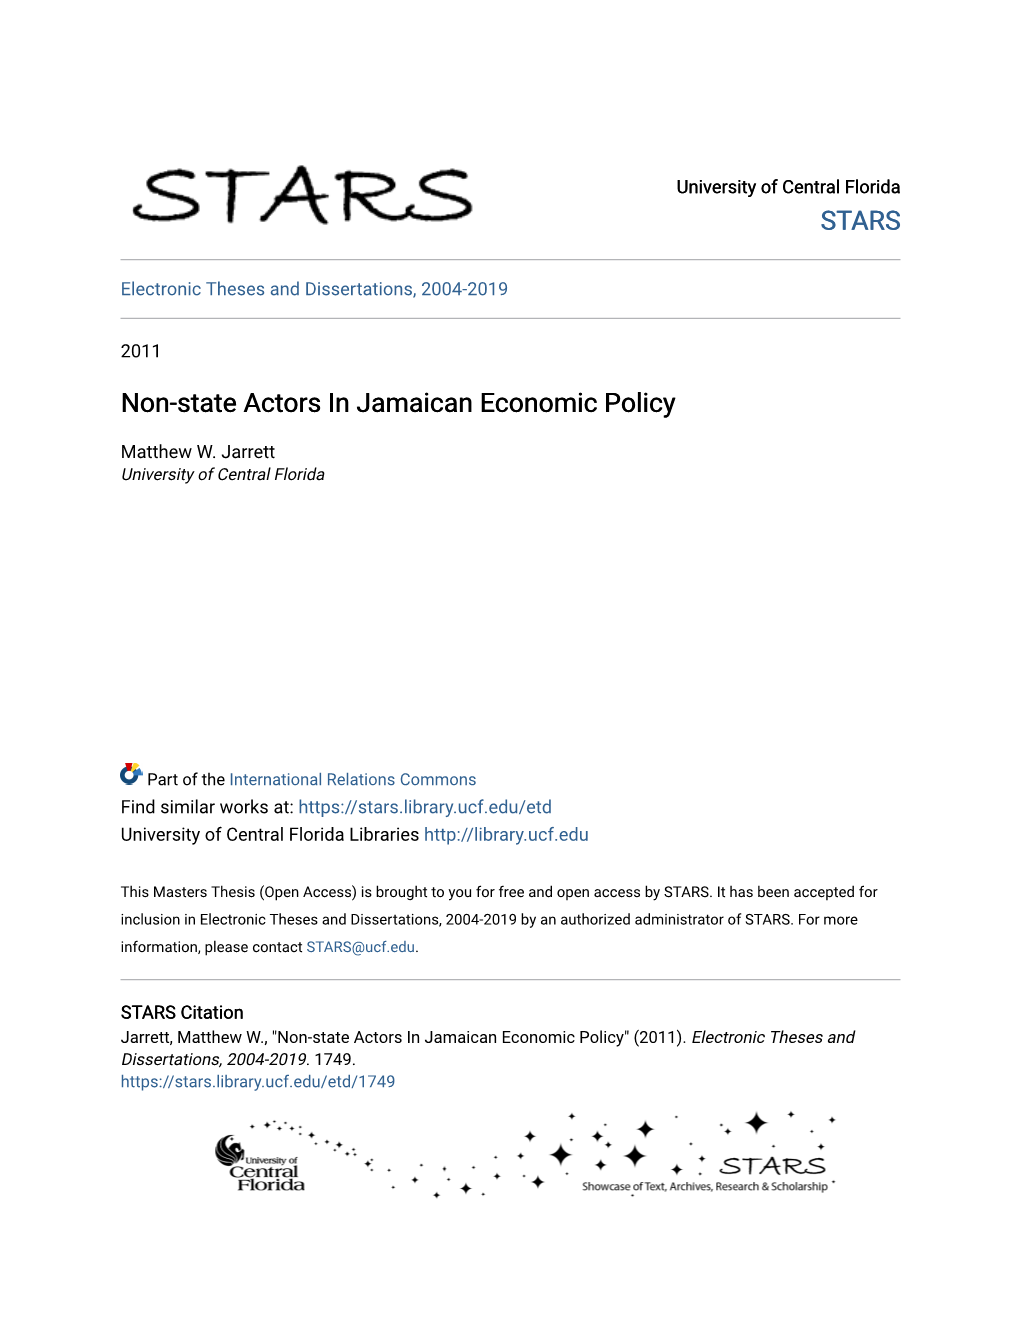 Non-State Actors in Jamaican Economic Policy